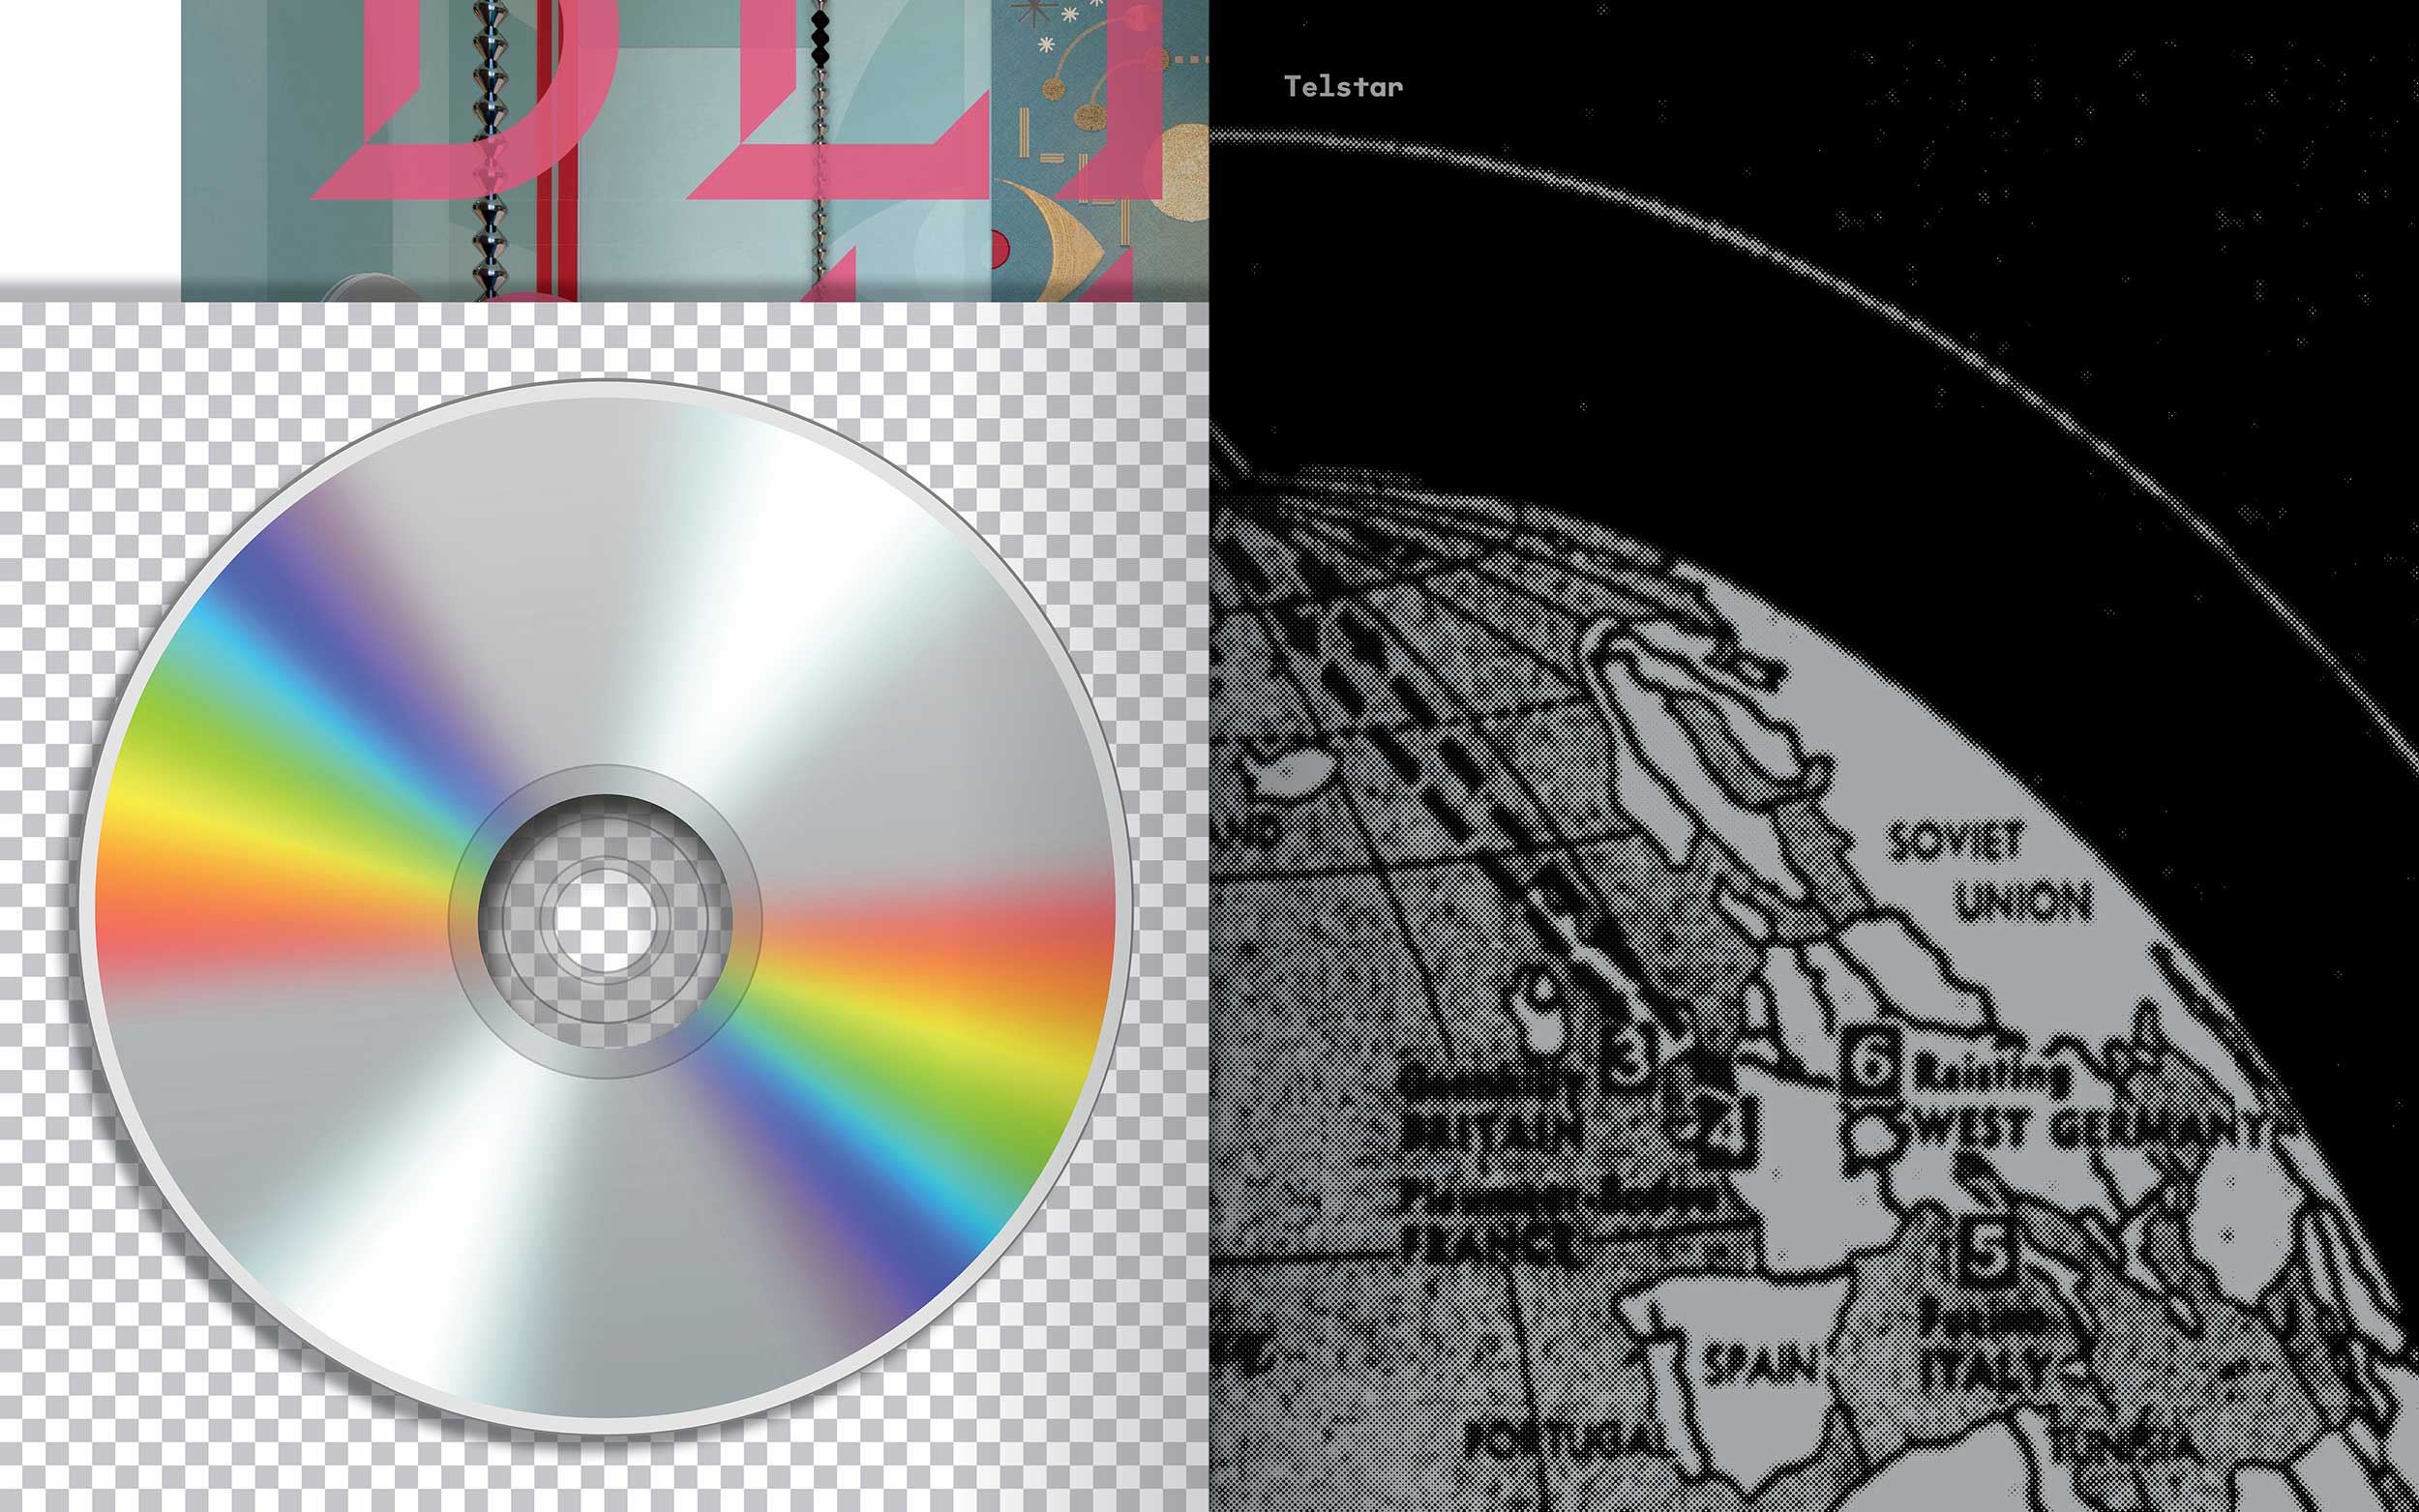 Detail of a zine with shiny rainbow compact disc on grey & white checkerboard pattern, with an old newspaper photo of a satellite trajectory over a map of Europe